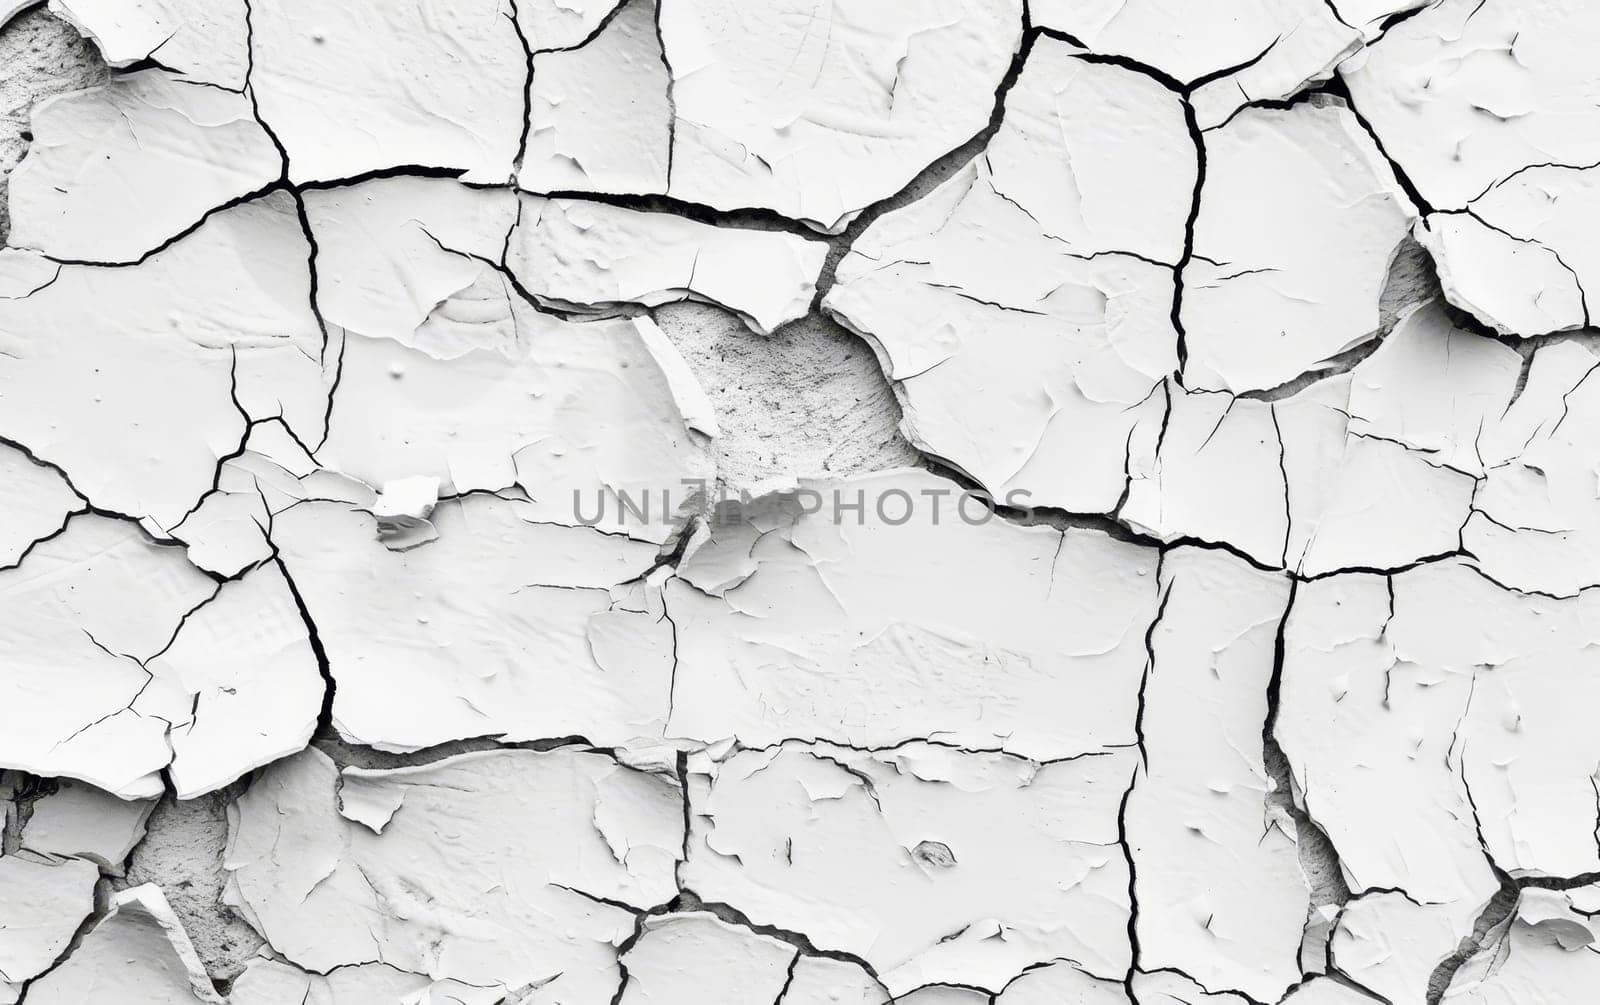 A wall cloaked in white shows the ravages of time with its cracked and peeling surface. The texture embodies the transient nature of all things